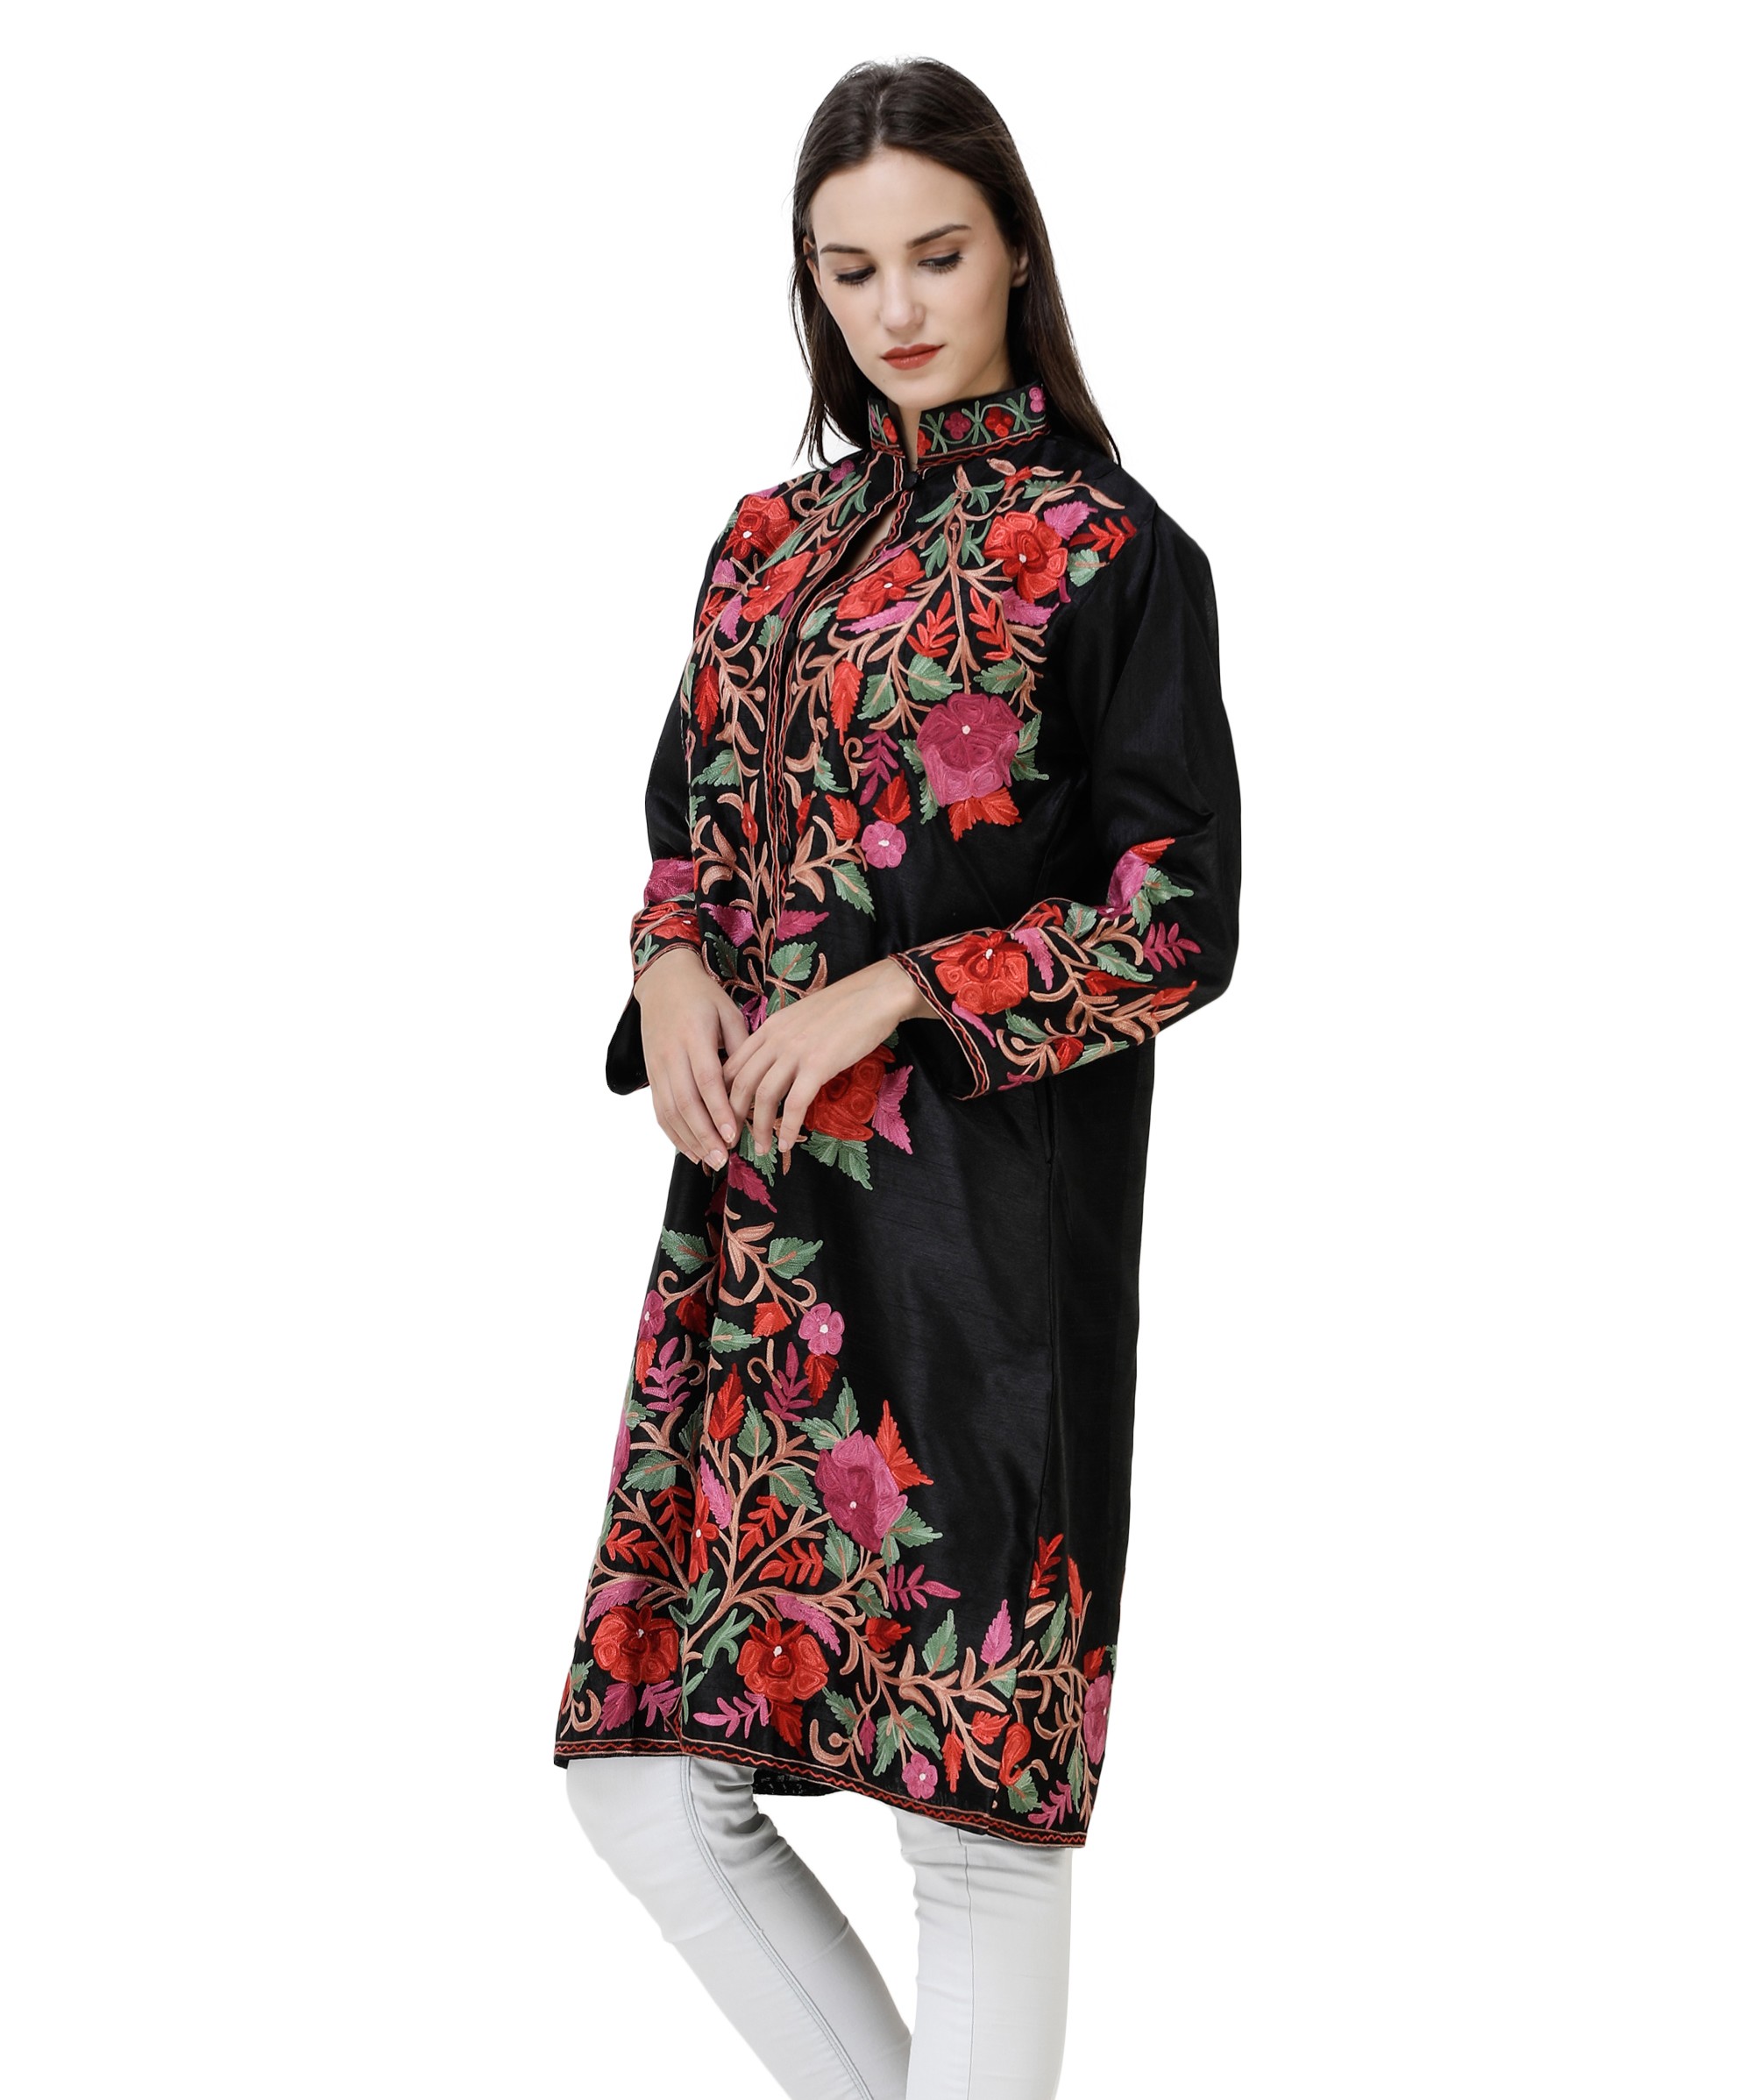 Caviar-Black Long Silk Jacket From Kashmir With Aari-Embroidered Giant ...